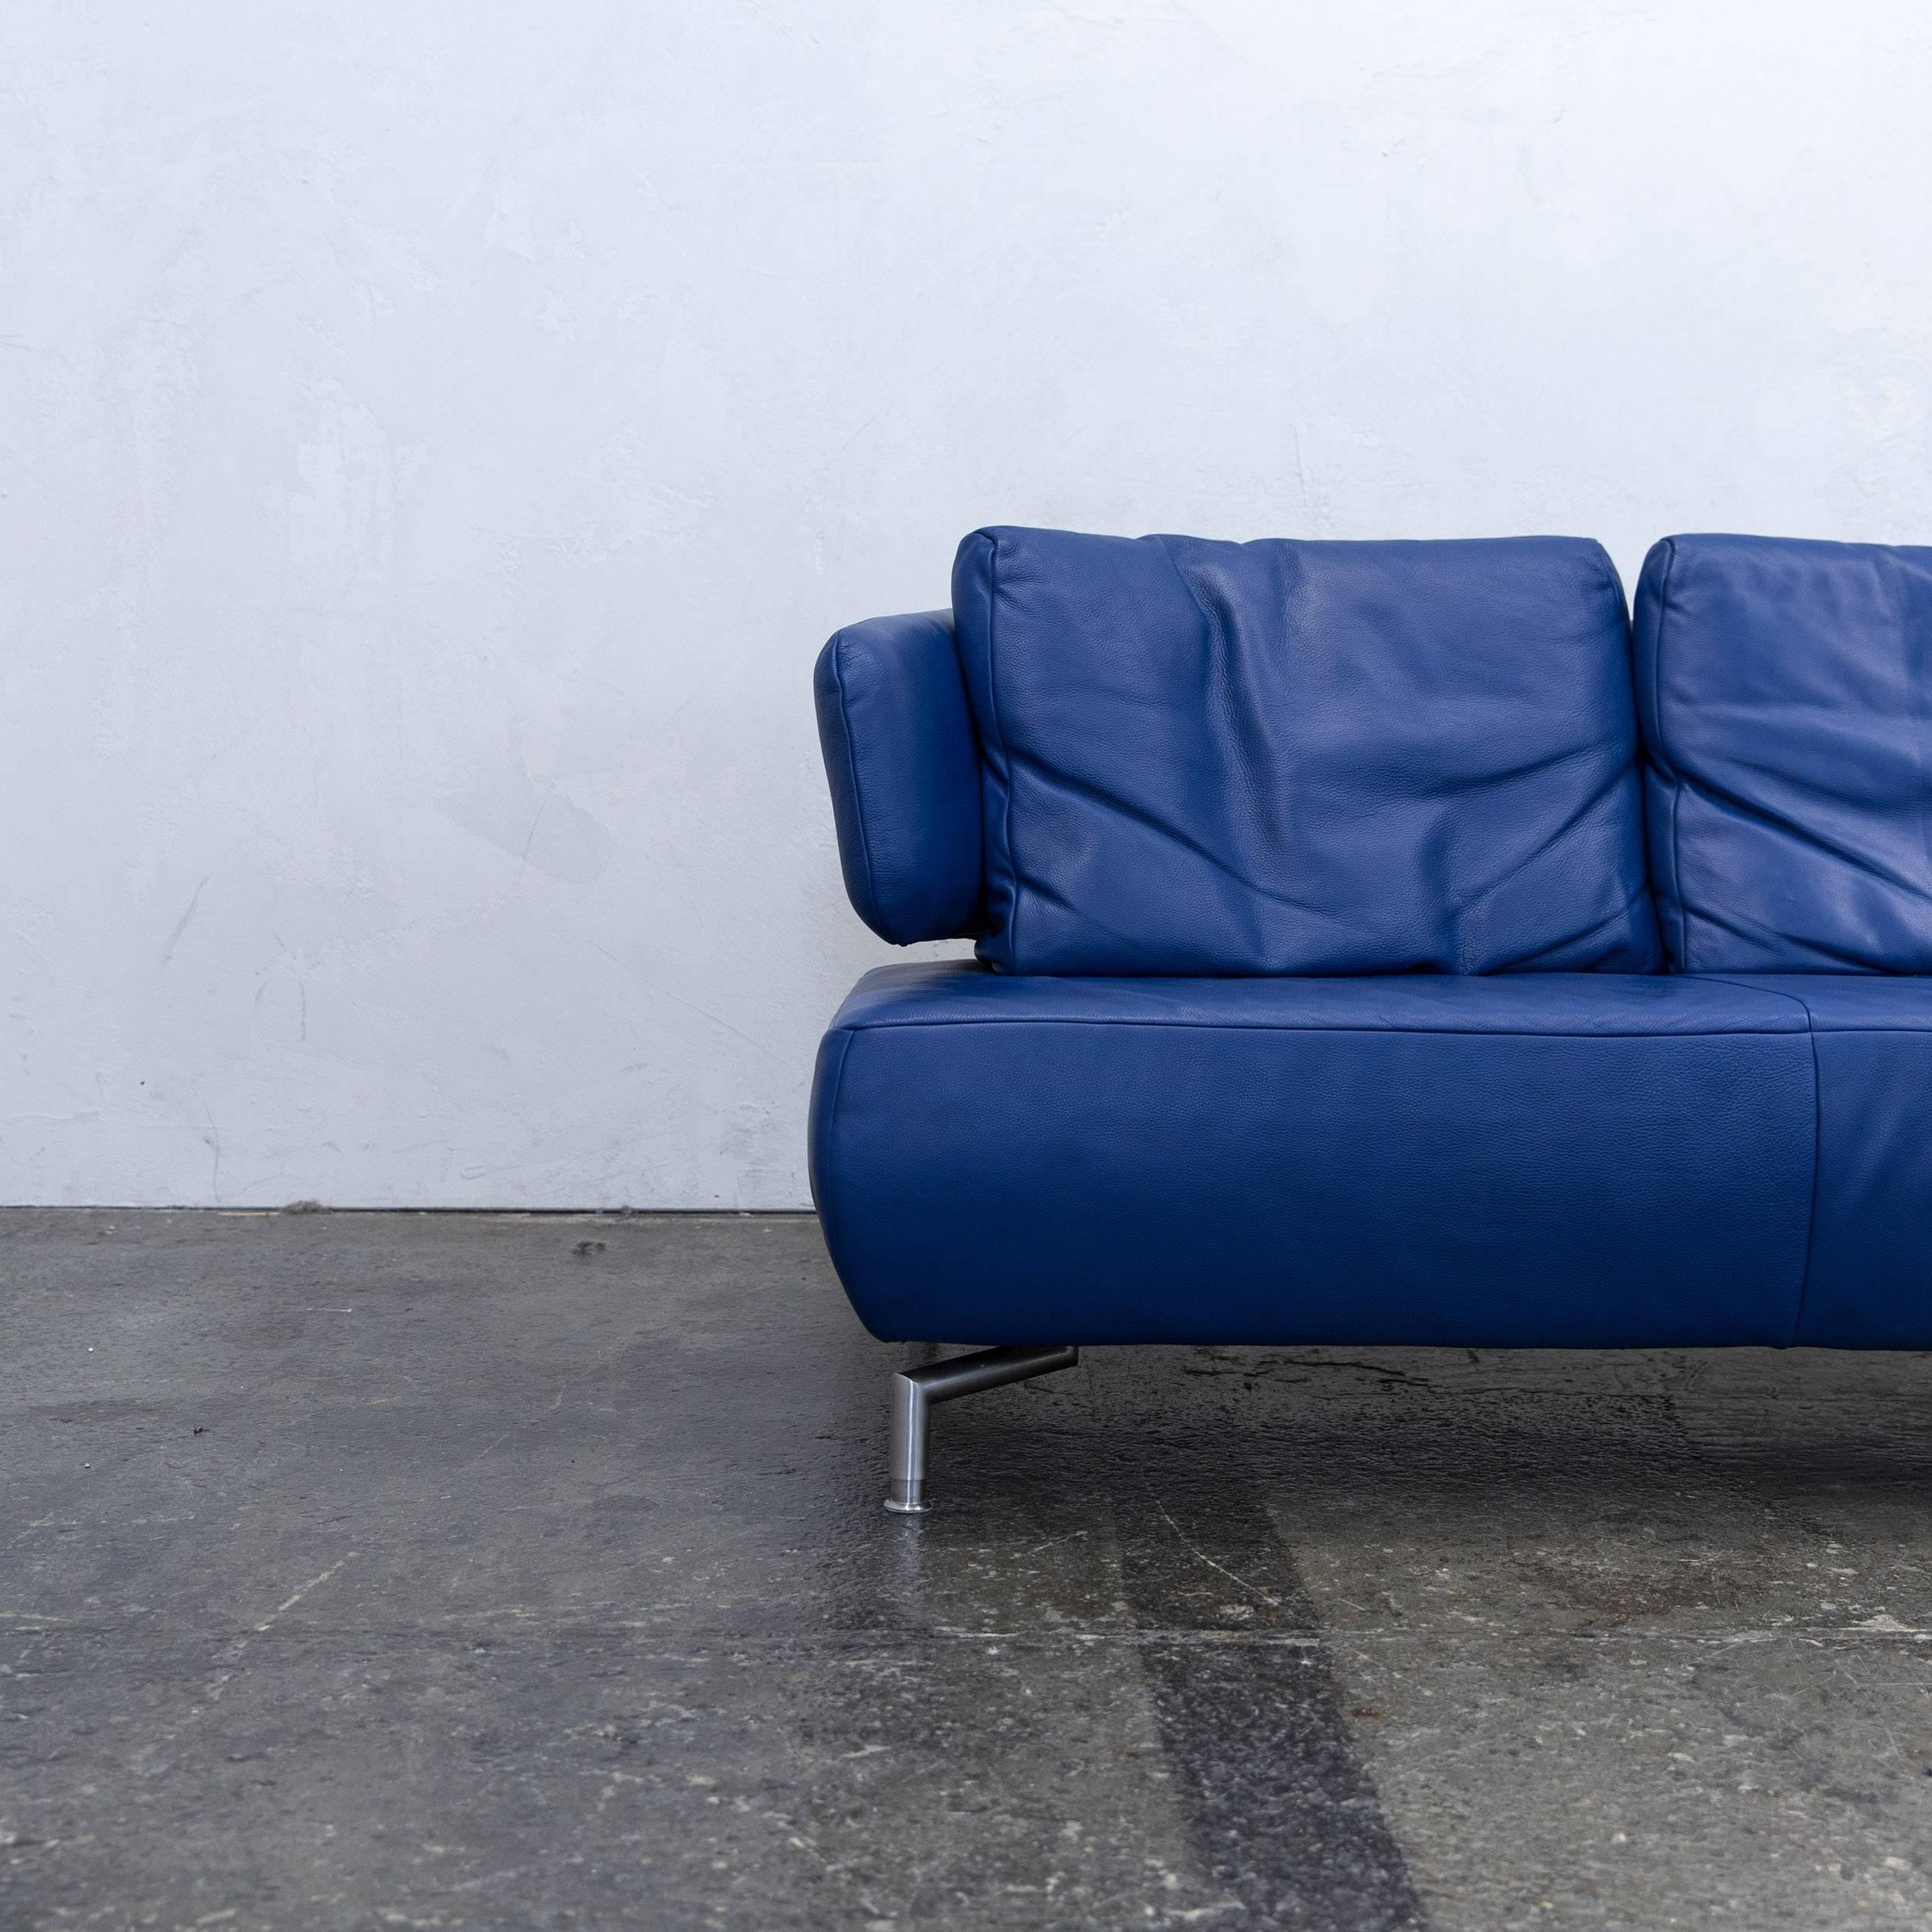 Blue colored original Koinor designer leather sofa in a minimalistic and modern design, with a convenient function, made for pure comfort and flexibility.